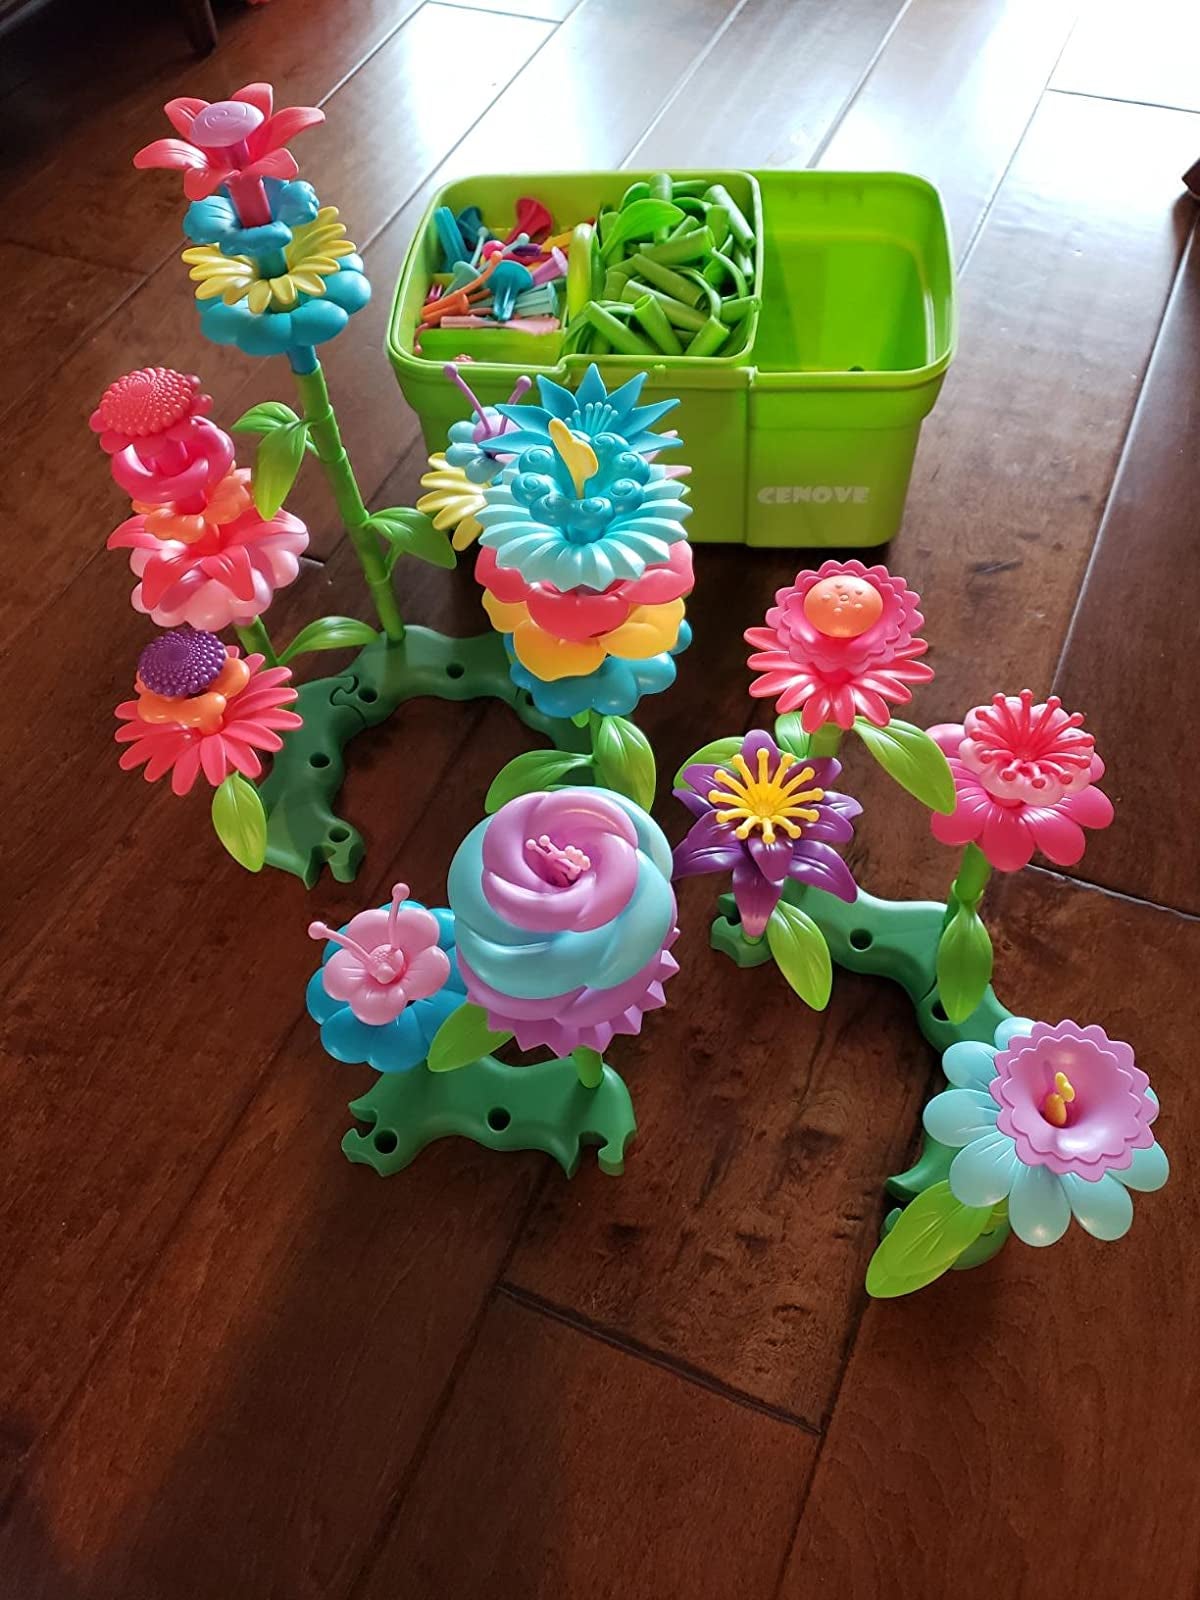 Reviewer's photo of plastic flower toys and bucket